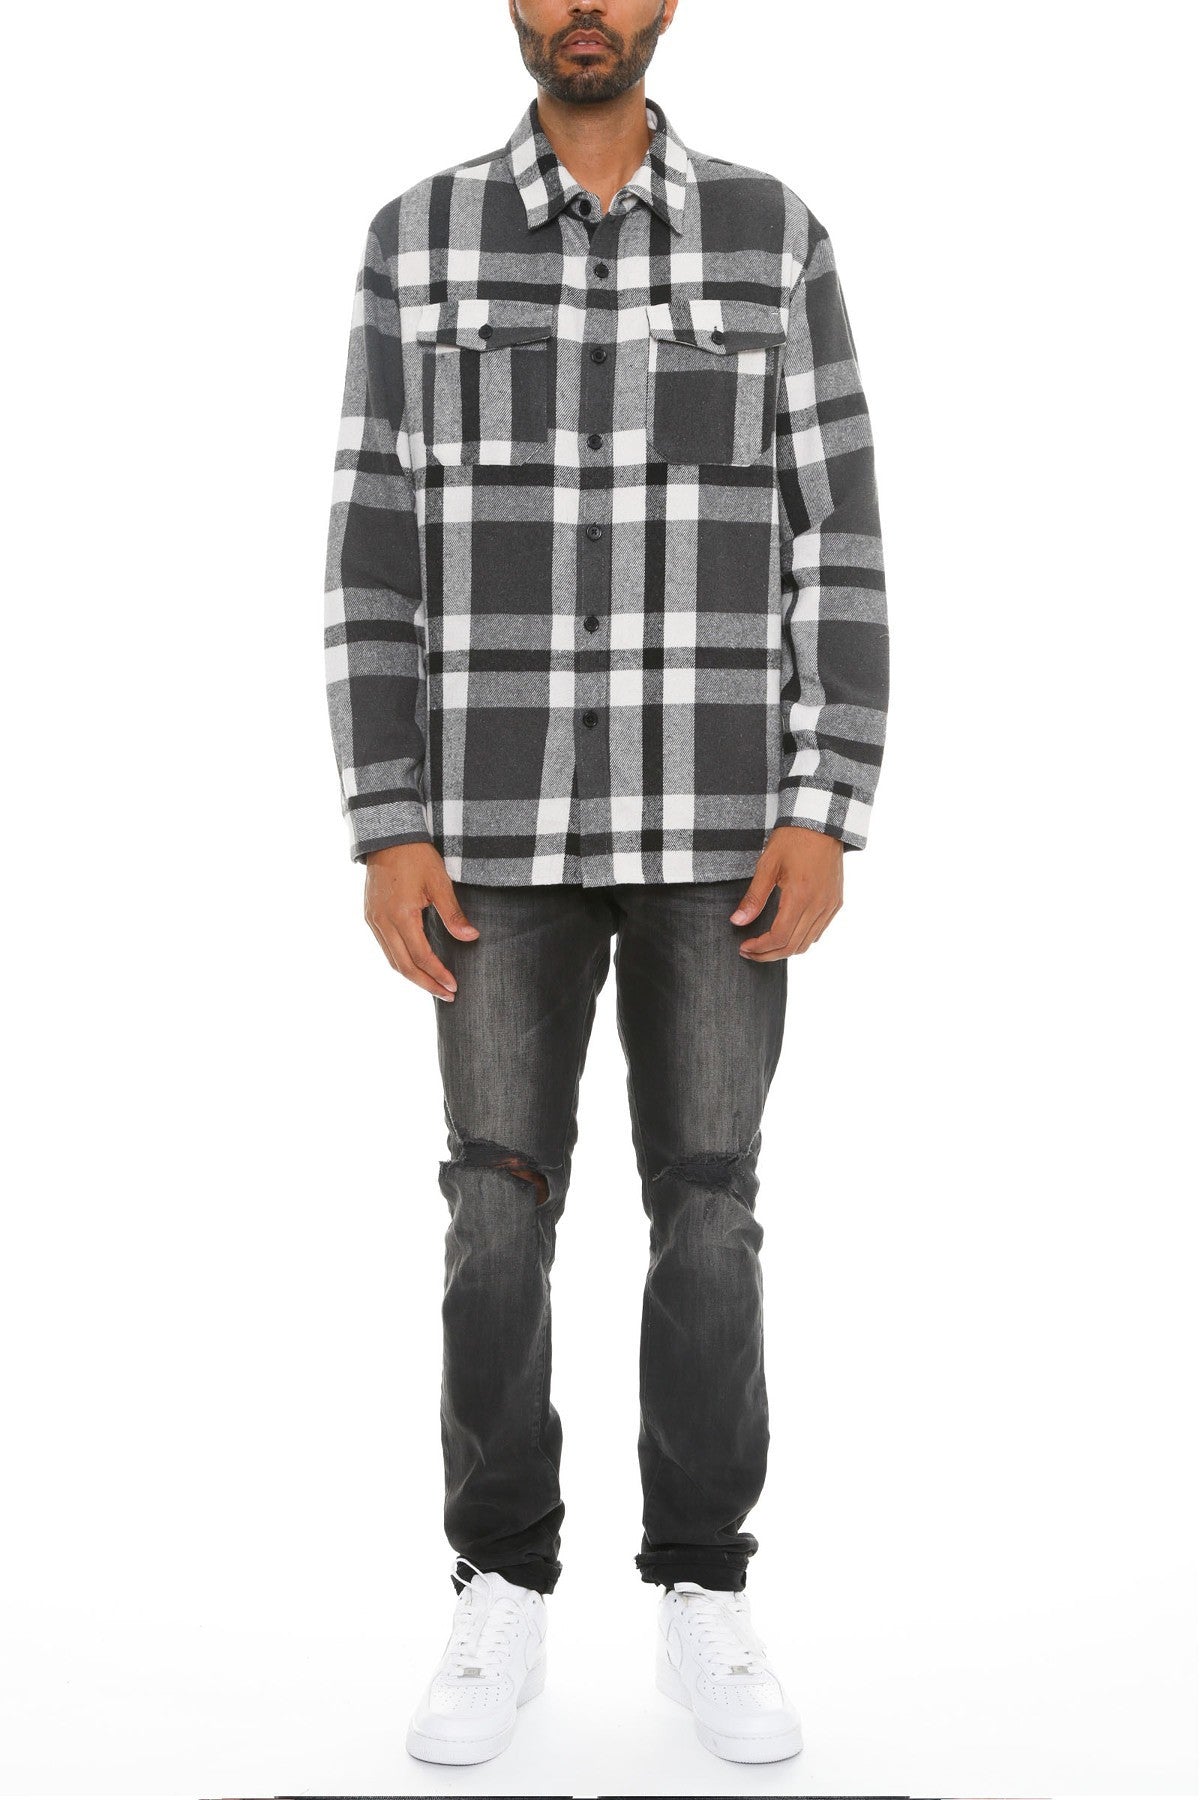 Grey/Black Men's Checkered Soft Flannel Shacket - 8 colors - men's button-up shirt at TFC&H Co.